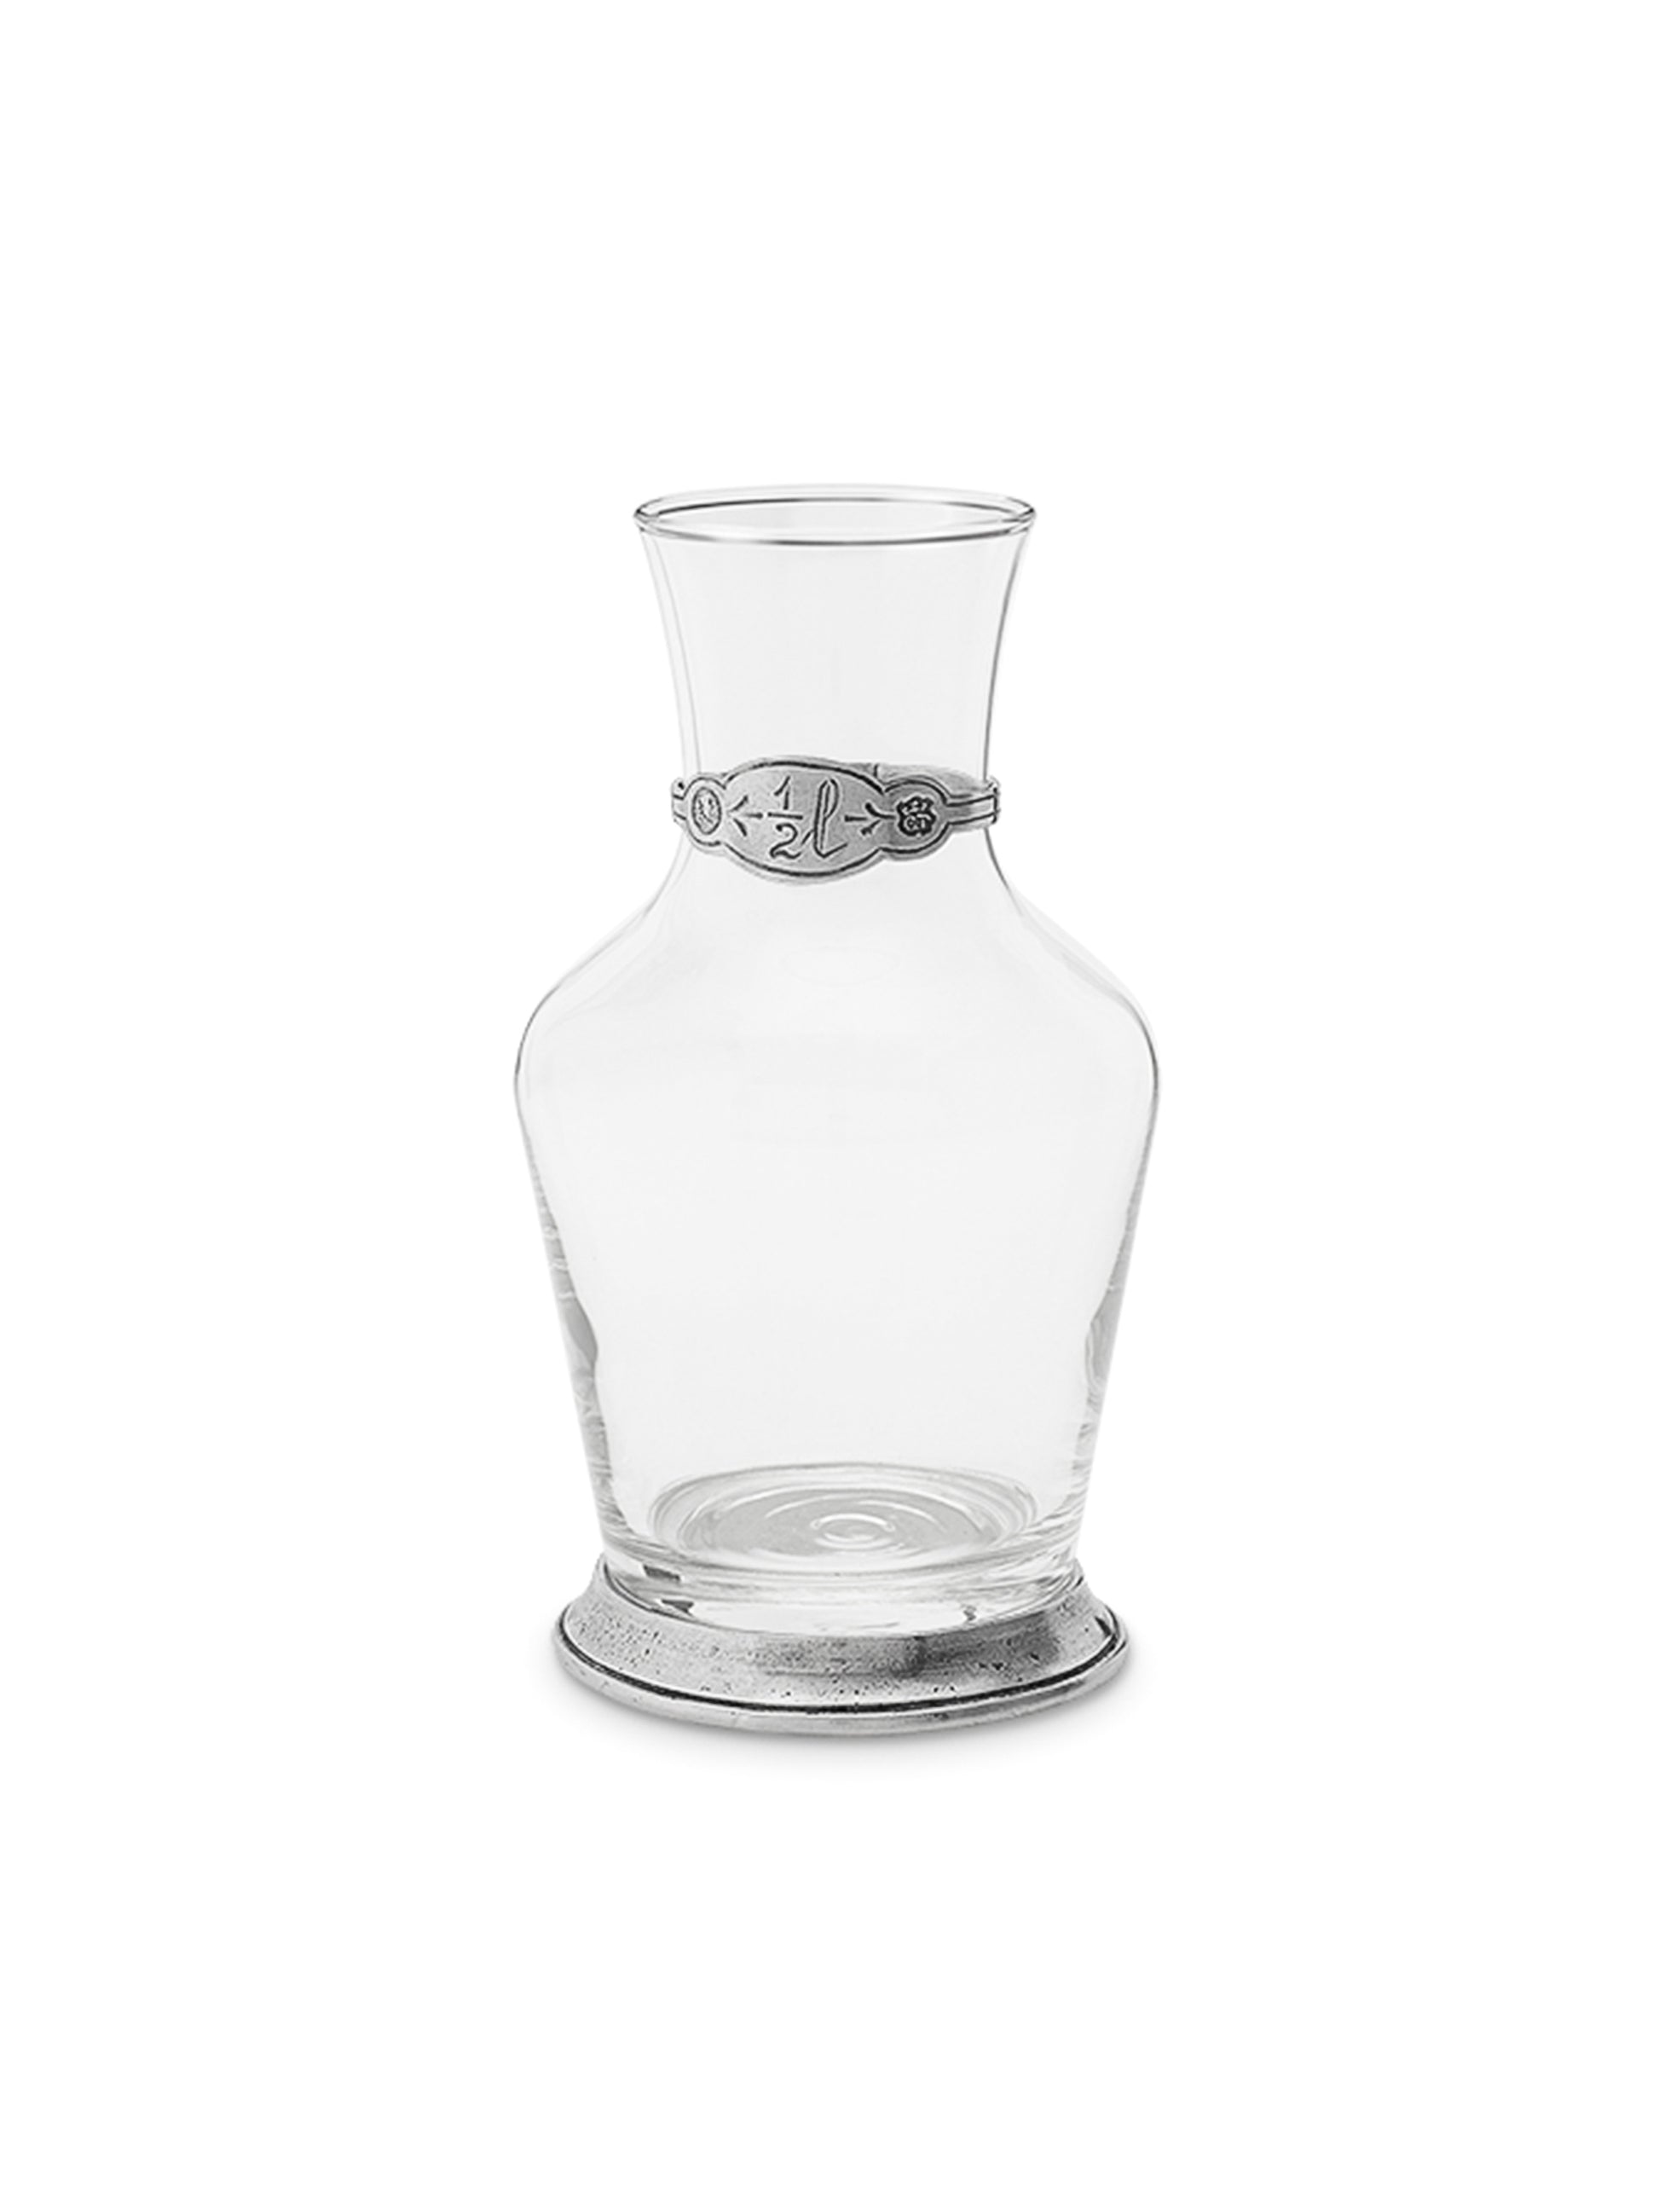 MATCH Pewter Glass Carafe 1/2L Weston Table